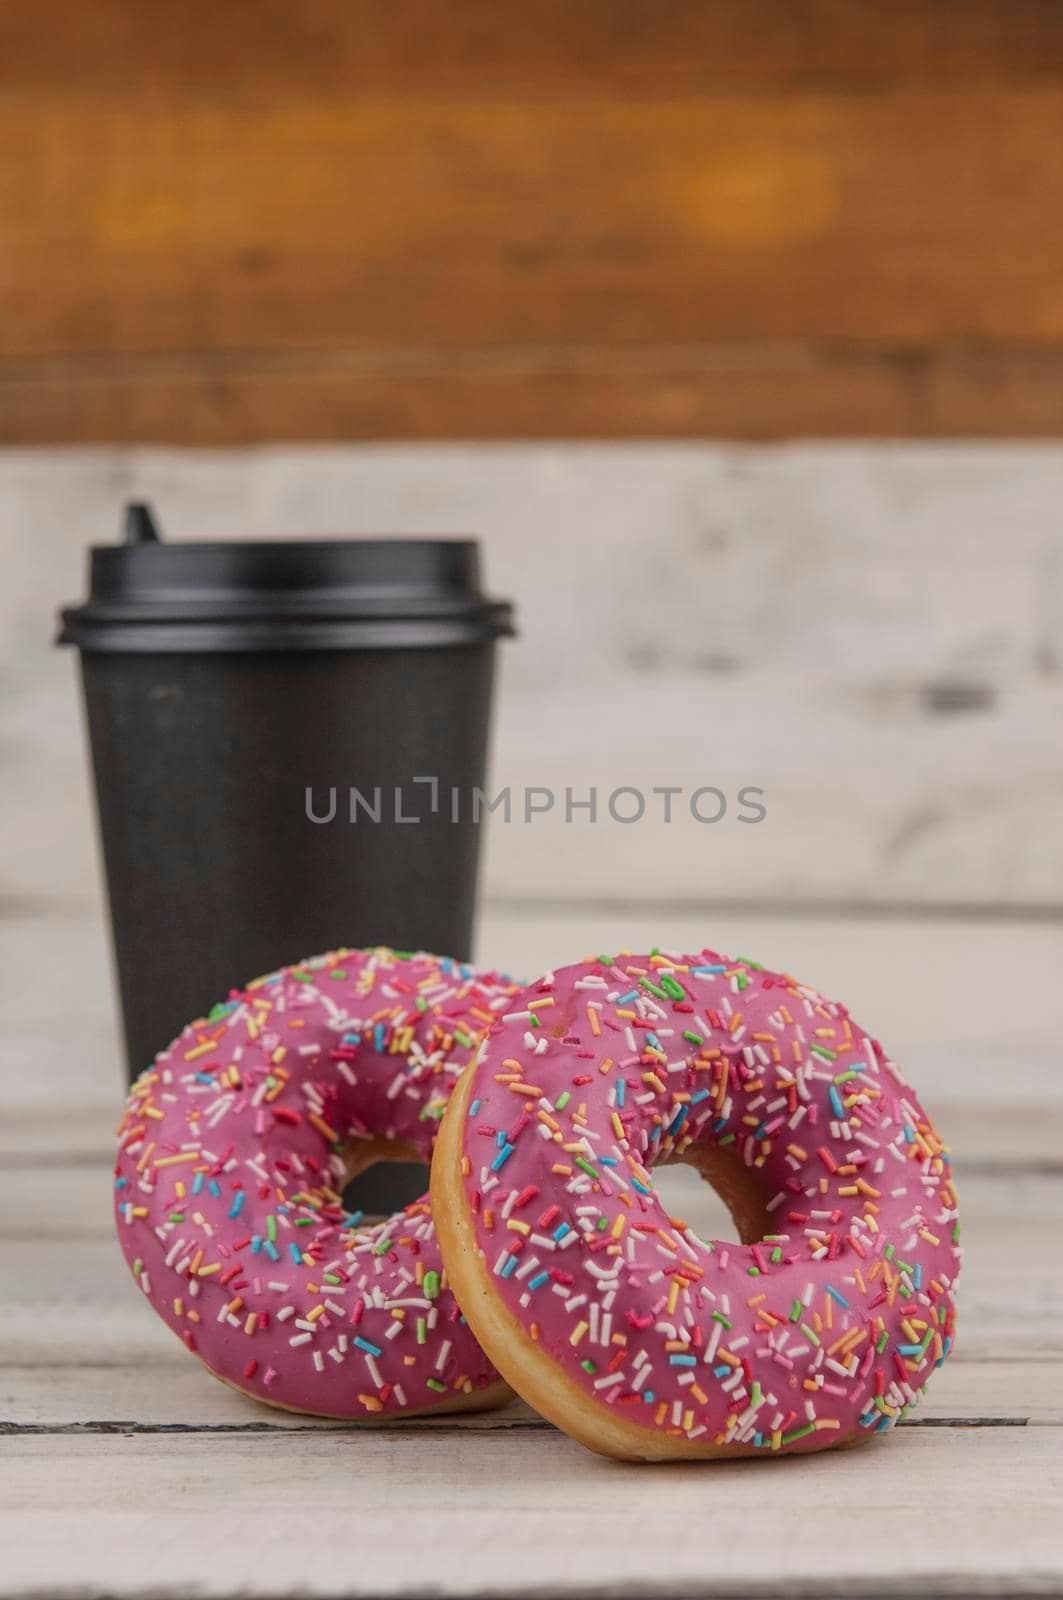 colorful donuts  and  disposable cup of coffee on a wooden table. Photo of sweecolorful donuts  and  disposable cup of coffee on a wooden table. Photo of sweets. Copy space. ts. Copy space. Mock-up